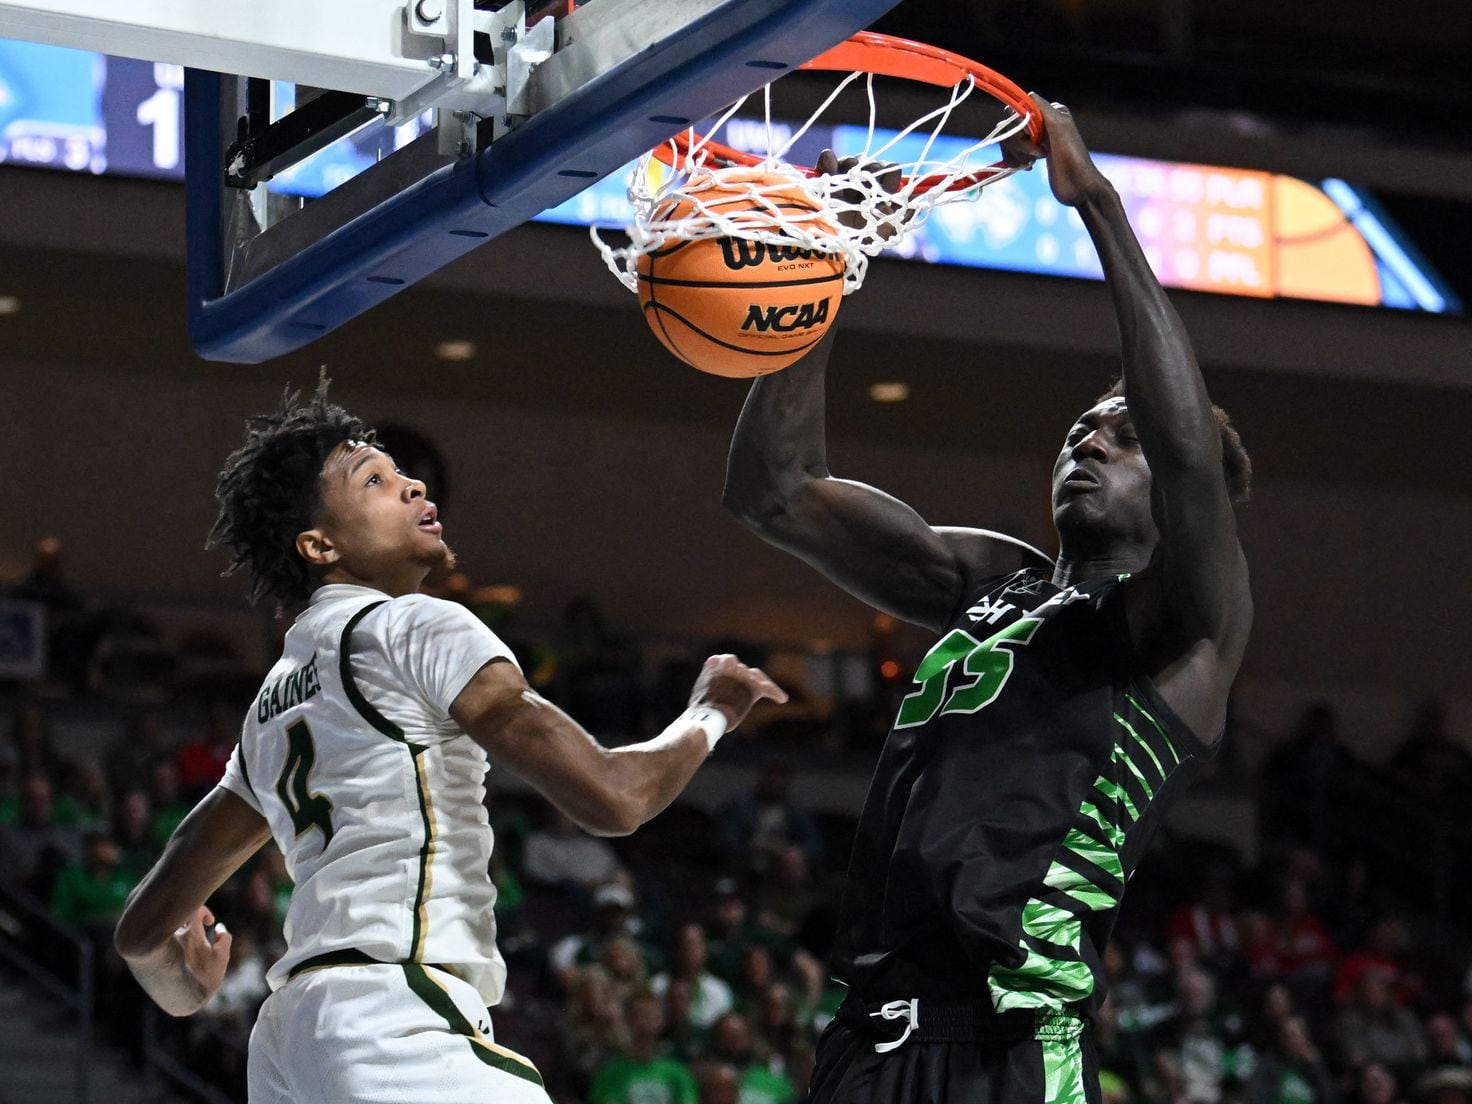 Will Las Vegas' Semipro Team Be Able to Steal NCAA Basketball's